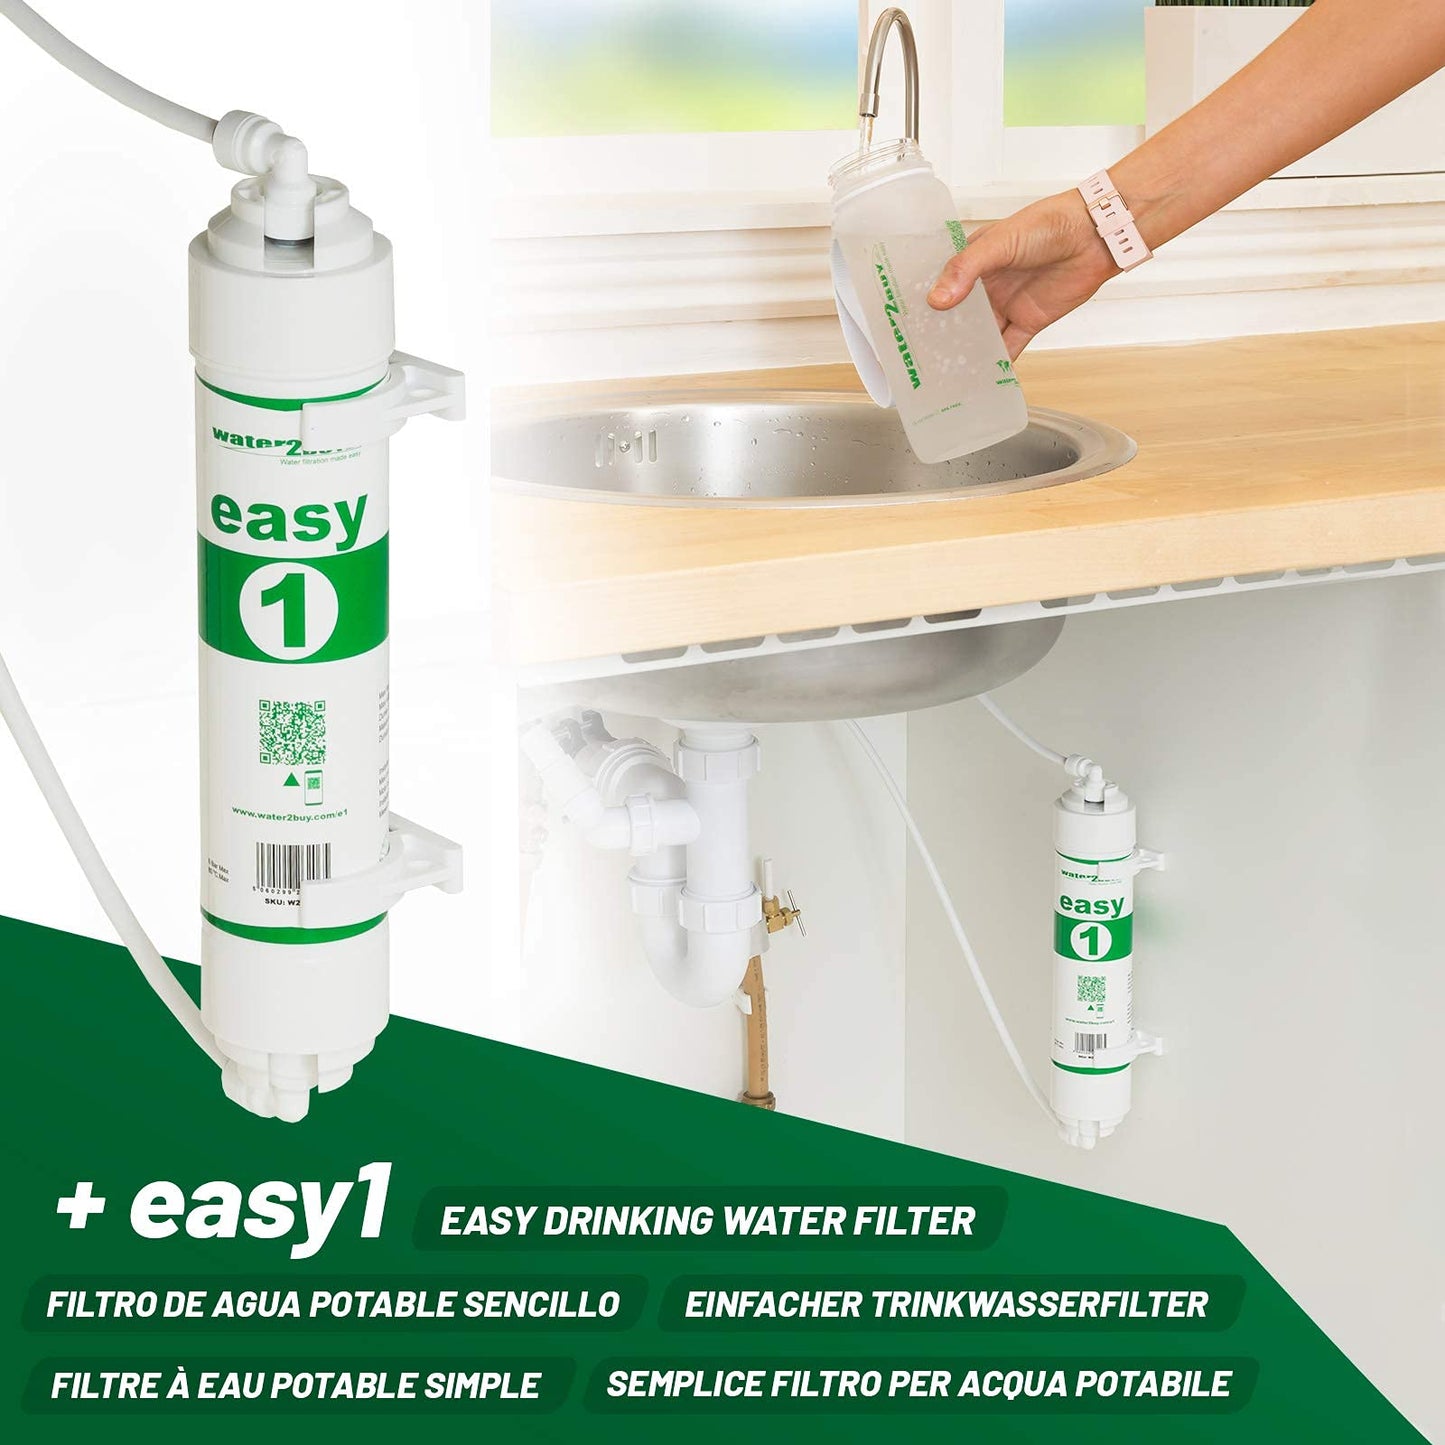 Easy1 Water Filter System with 2 Water Bottles, provide 6000L of clean water for 6-12 months, NSF/FDS/ISO 9001 & 14001 Certified, Under Sink Water Filter tap Easy DIY Kit Model